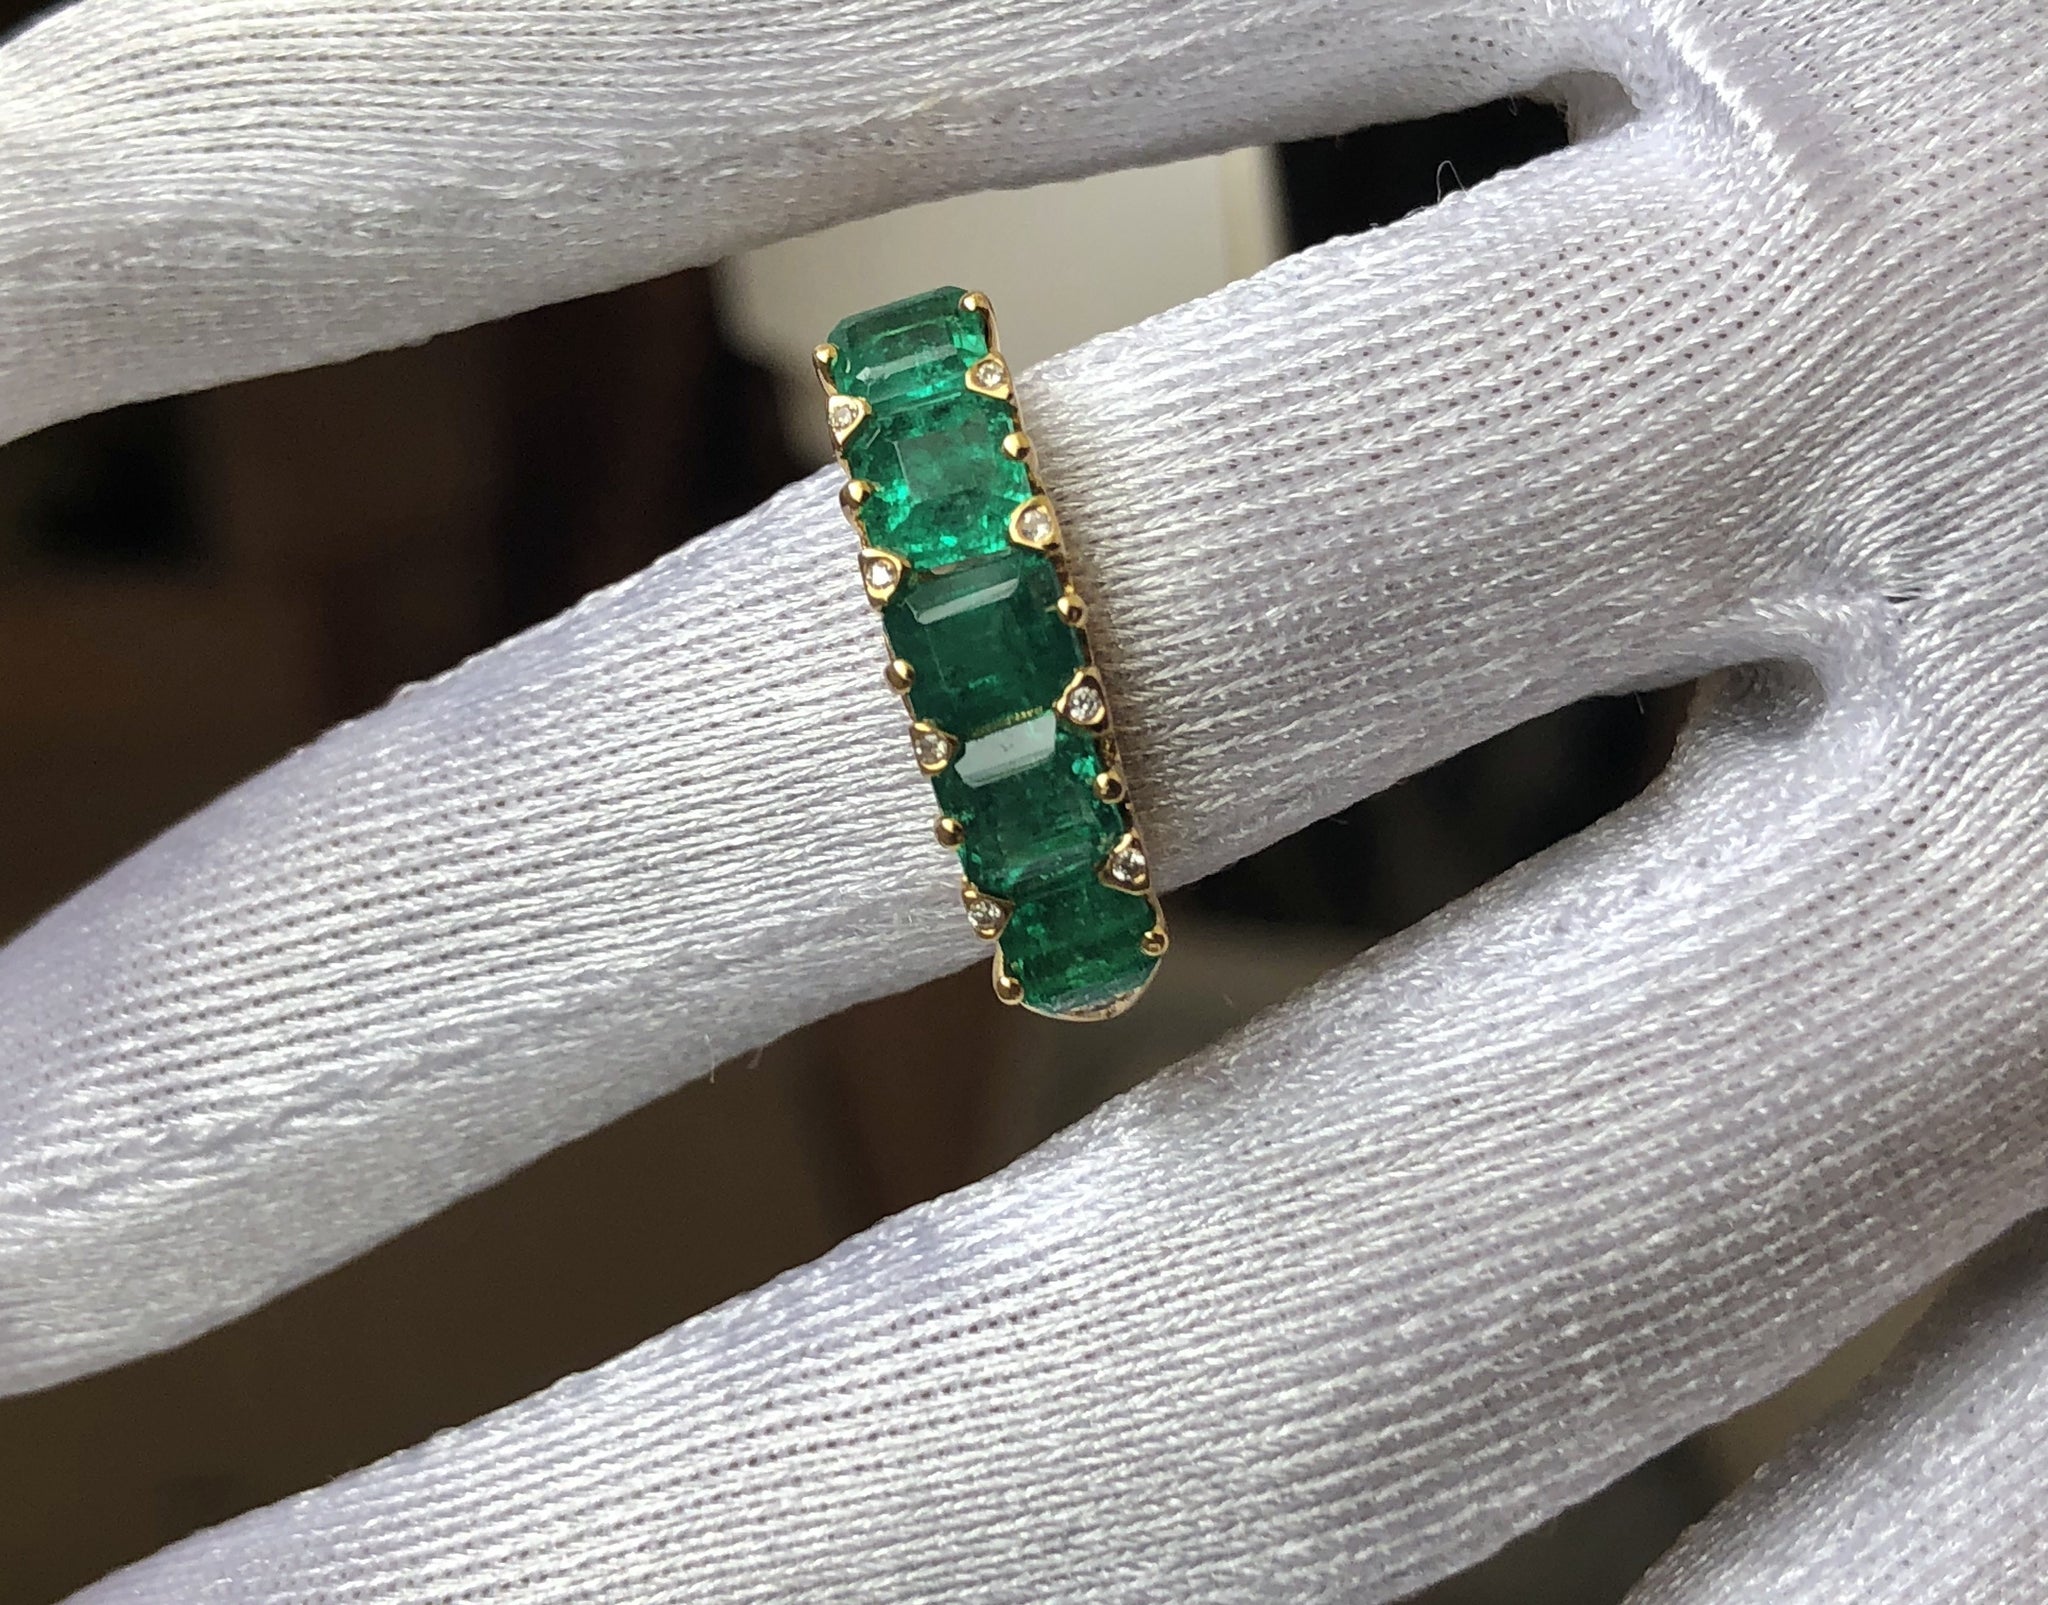 Magnificent Colombian Emerald Five-Stone Ring 18 Karat Gold